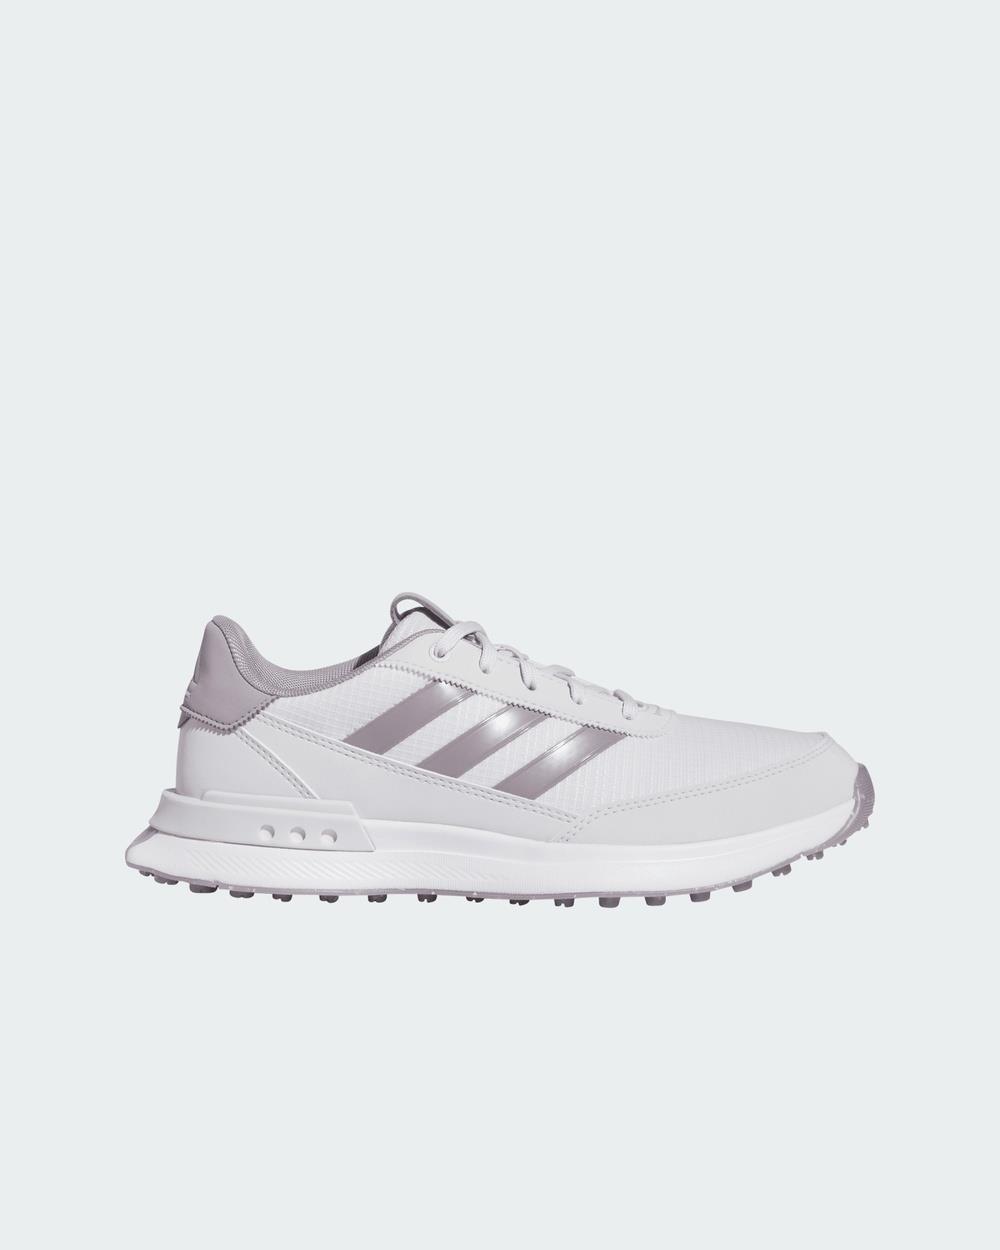 adidas Performance - S2G 24 Spikeless Golf Shoes Womens - Casual Shoes (Dash Grey / Preloved Fig / Silver Metallic) S2G 24 Spikeless Golf Shoes Womens